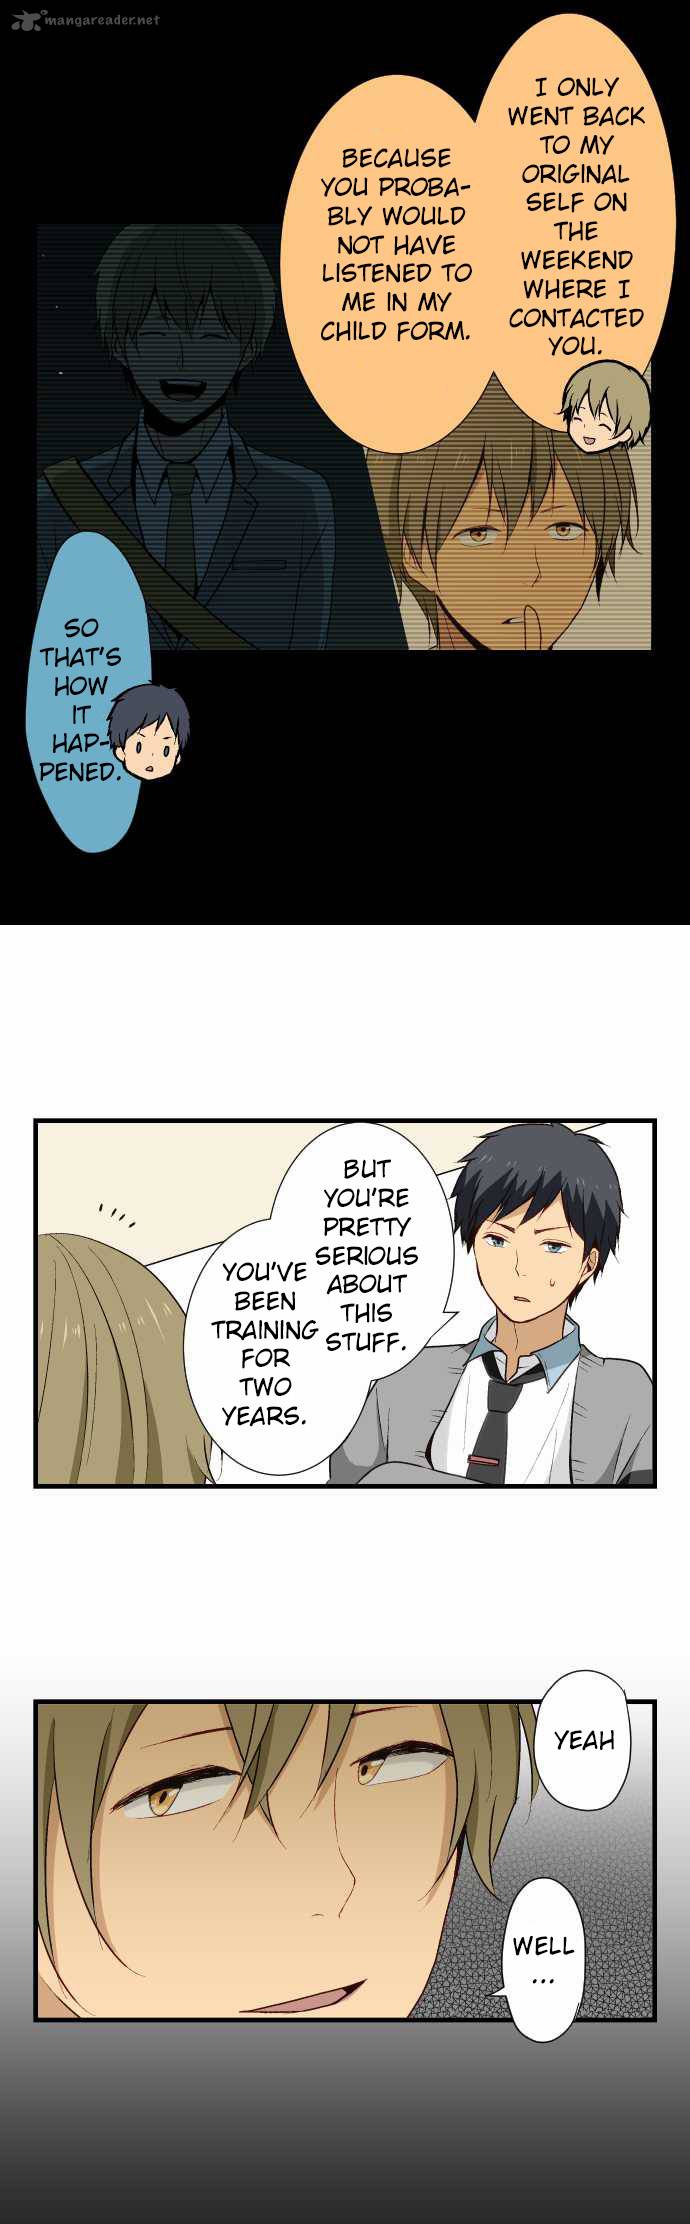 relife_12_10